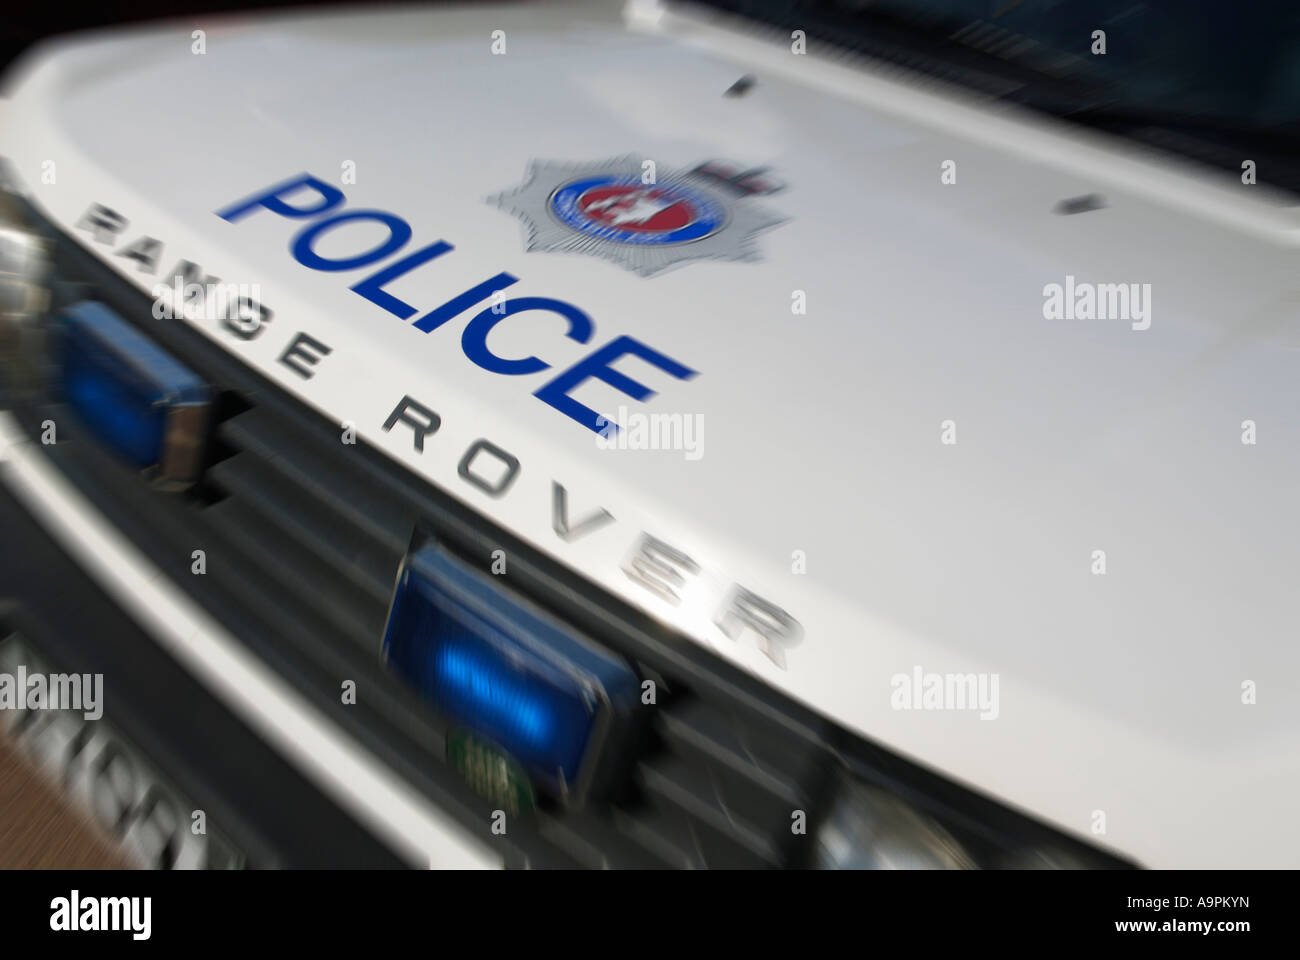 close-up-of-english-police-specification-range-rover-p38-europe-uk-A9PKYN.jpg